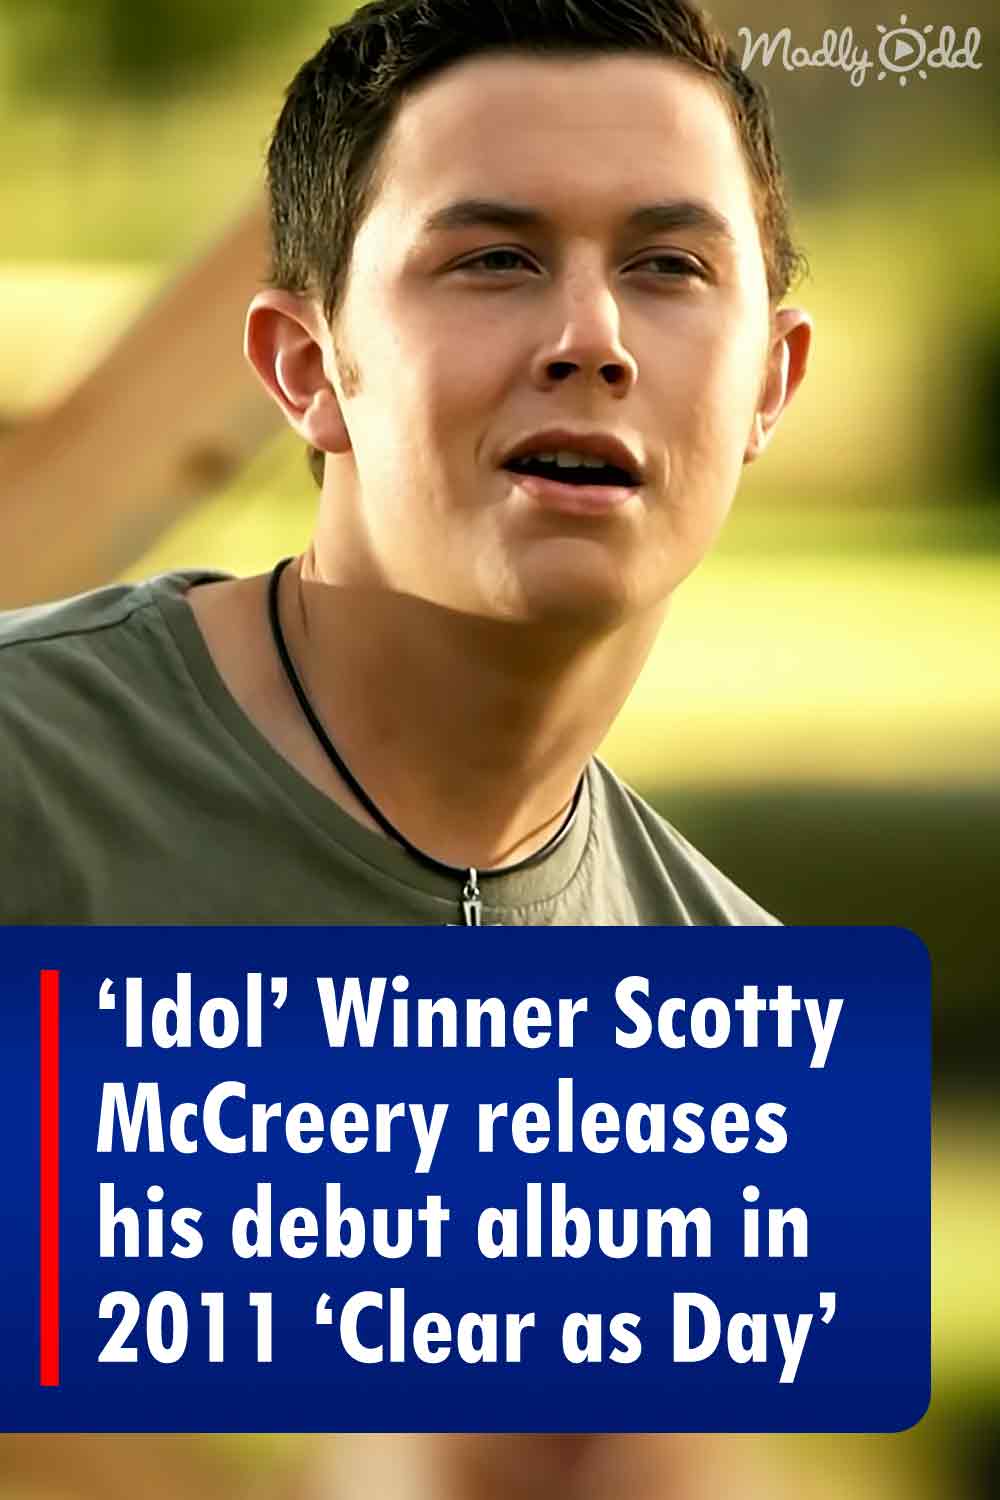 ‘Idol’ Winner Scotty McCreery releases his debut album in 2011 ‘Clear as Day’